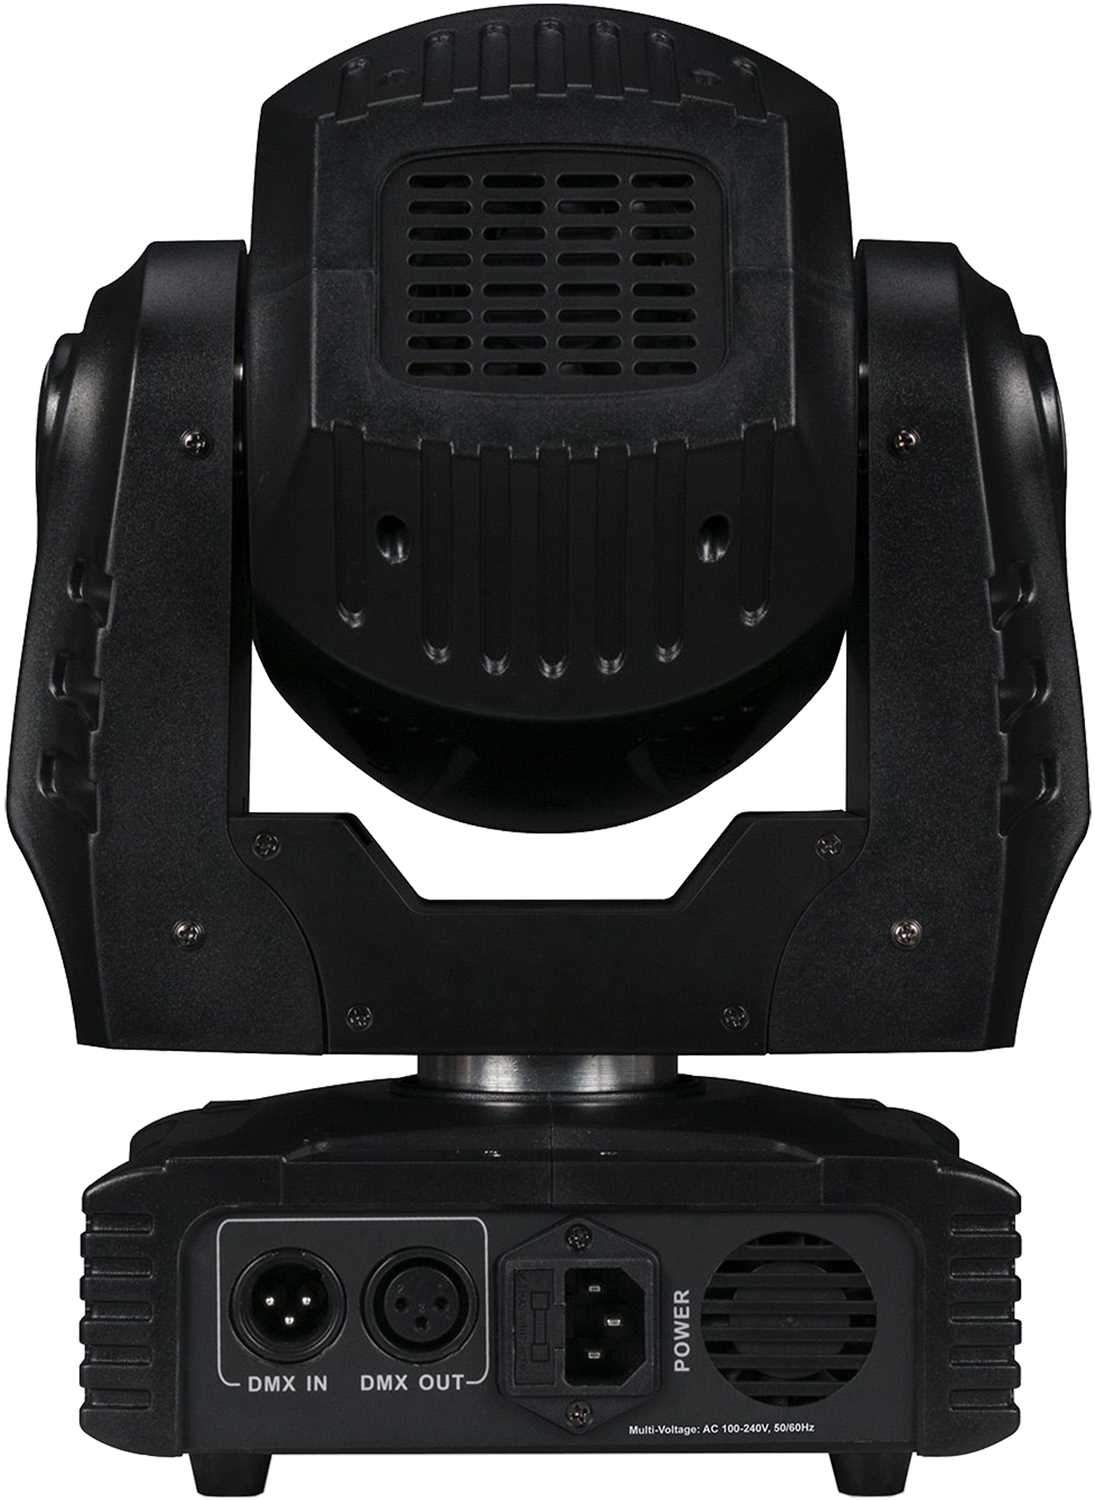 Eliminator Stealth Spot 60W LED Moving Head 2-Pack - PSSL ProSound and Stage Lighting